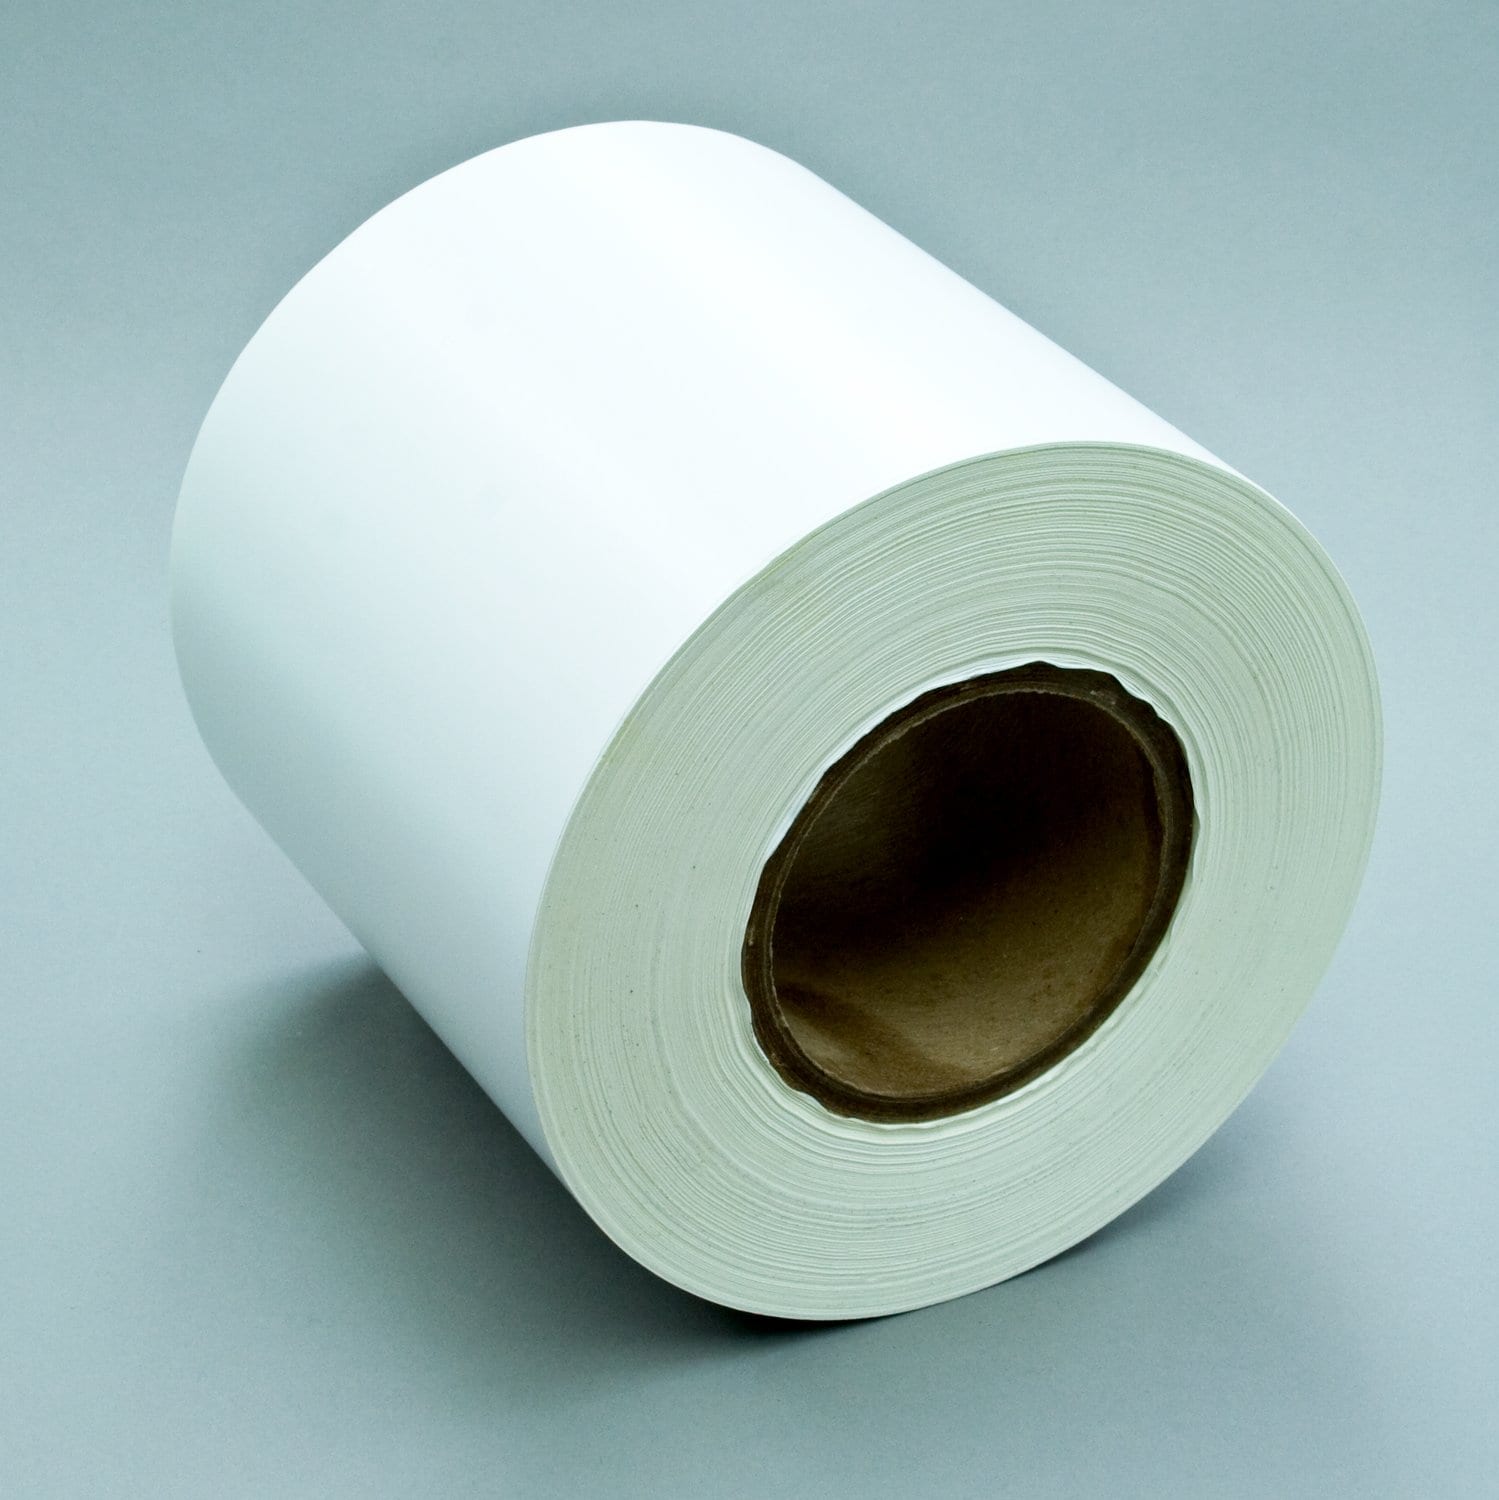 7100013286 - 3M Sheet and Screen Label Material 7051SA, Soft White EL Vinyl, Roll,
Config